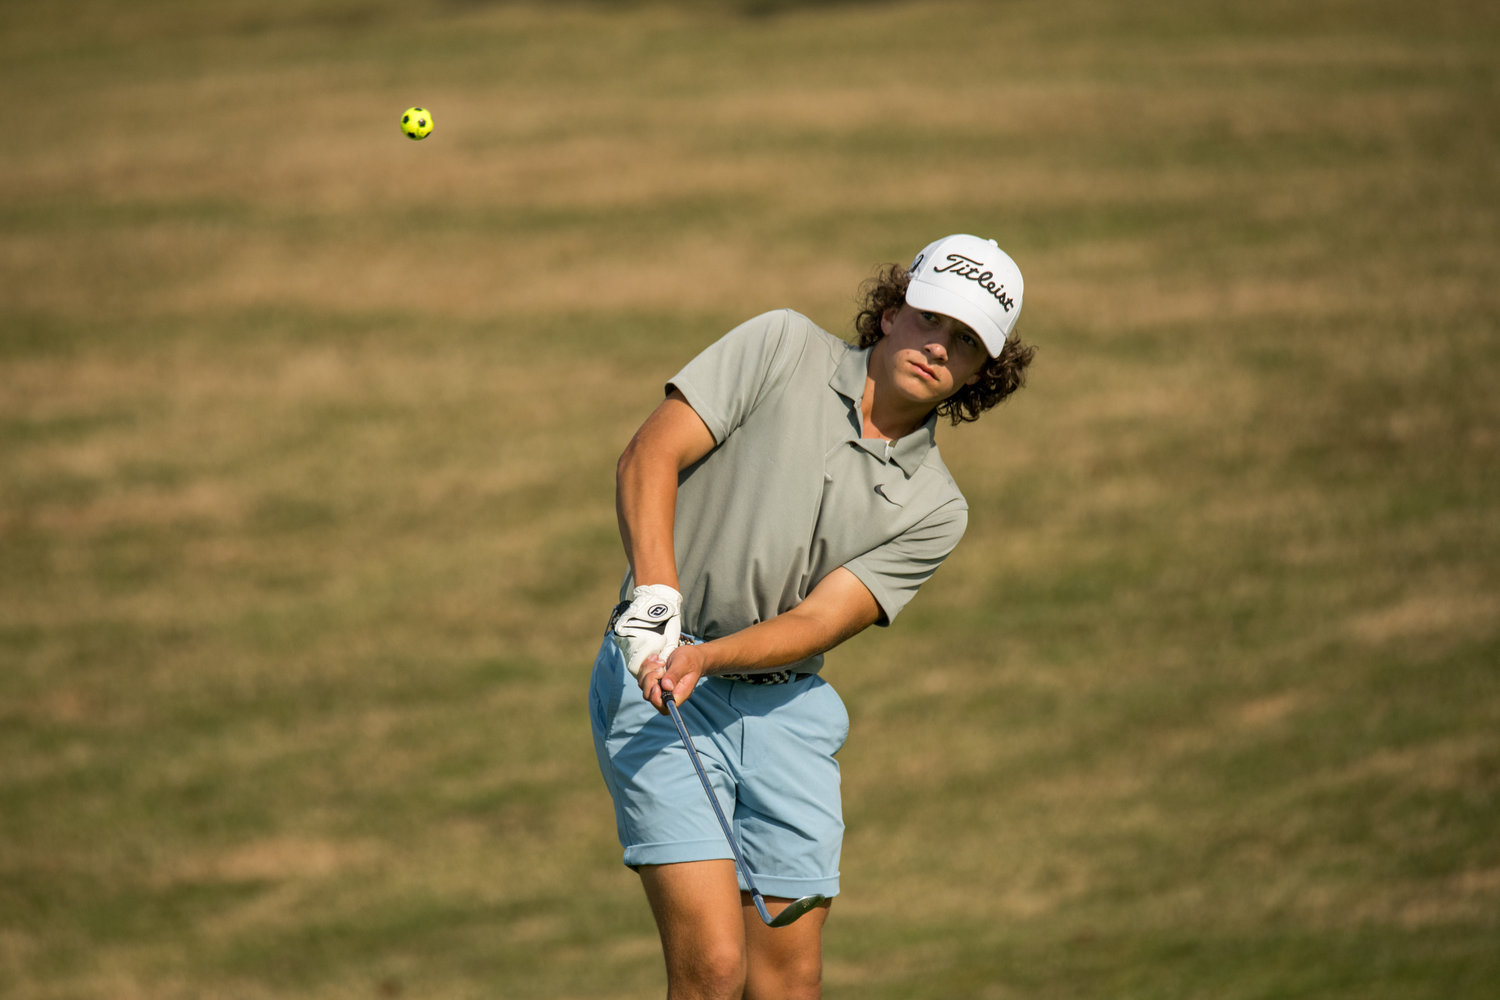 Barneveld’s Jacob Olearczyk hits a shot during Wednesday’s second round at the New York State boys 14U Amateur Championships at Soaring Eagles Golf Course at Mark Twain State Park in Horseheads. Olearczyk won the event, repeating as champ after winning in 2021.